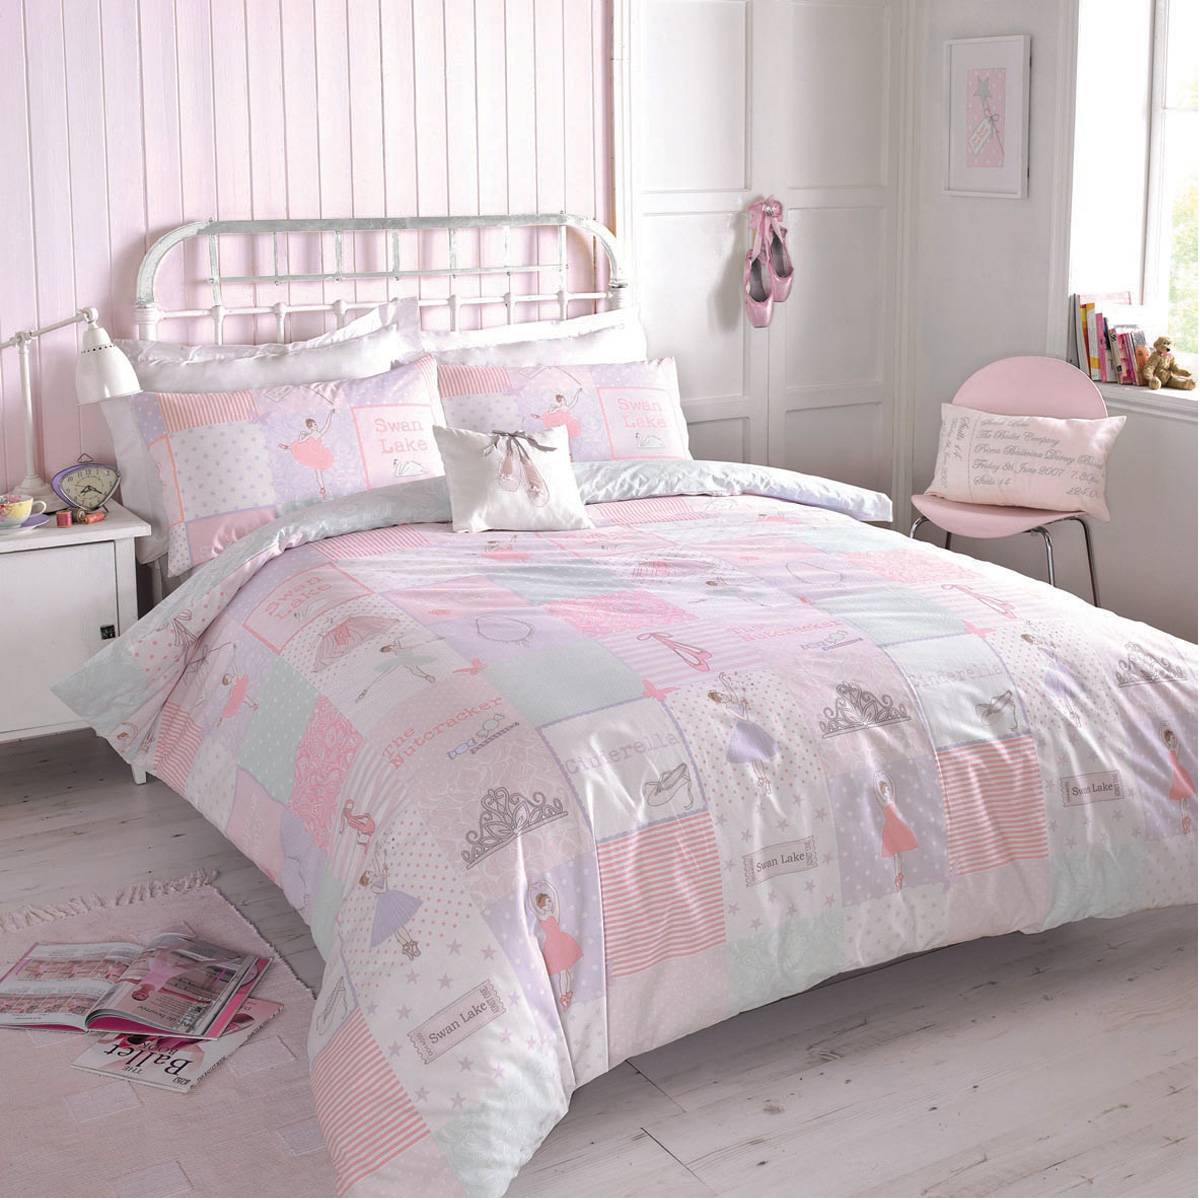 White Turqouise Duvet Interesting White Turquoise Pink Patterned Duvet Set In White Iron Bed Installed On The White Wooden Striped Glossy Floor Bedroom Cool And Lovely Bedroom Designs With Creative Duvet Covers